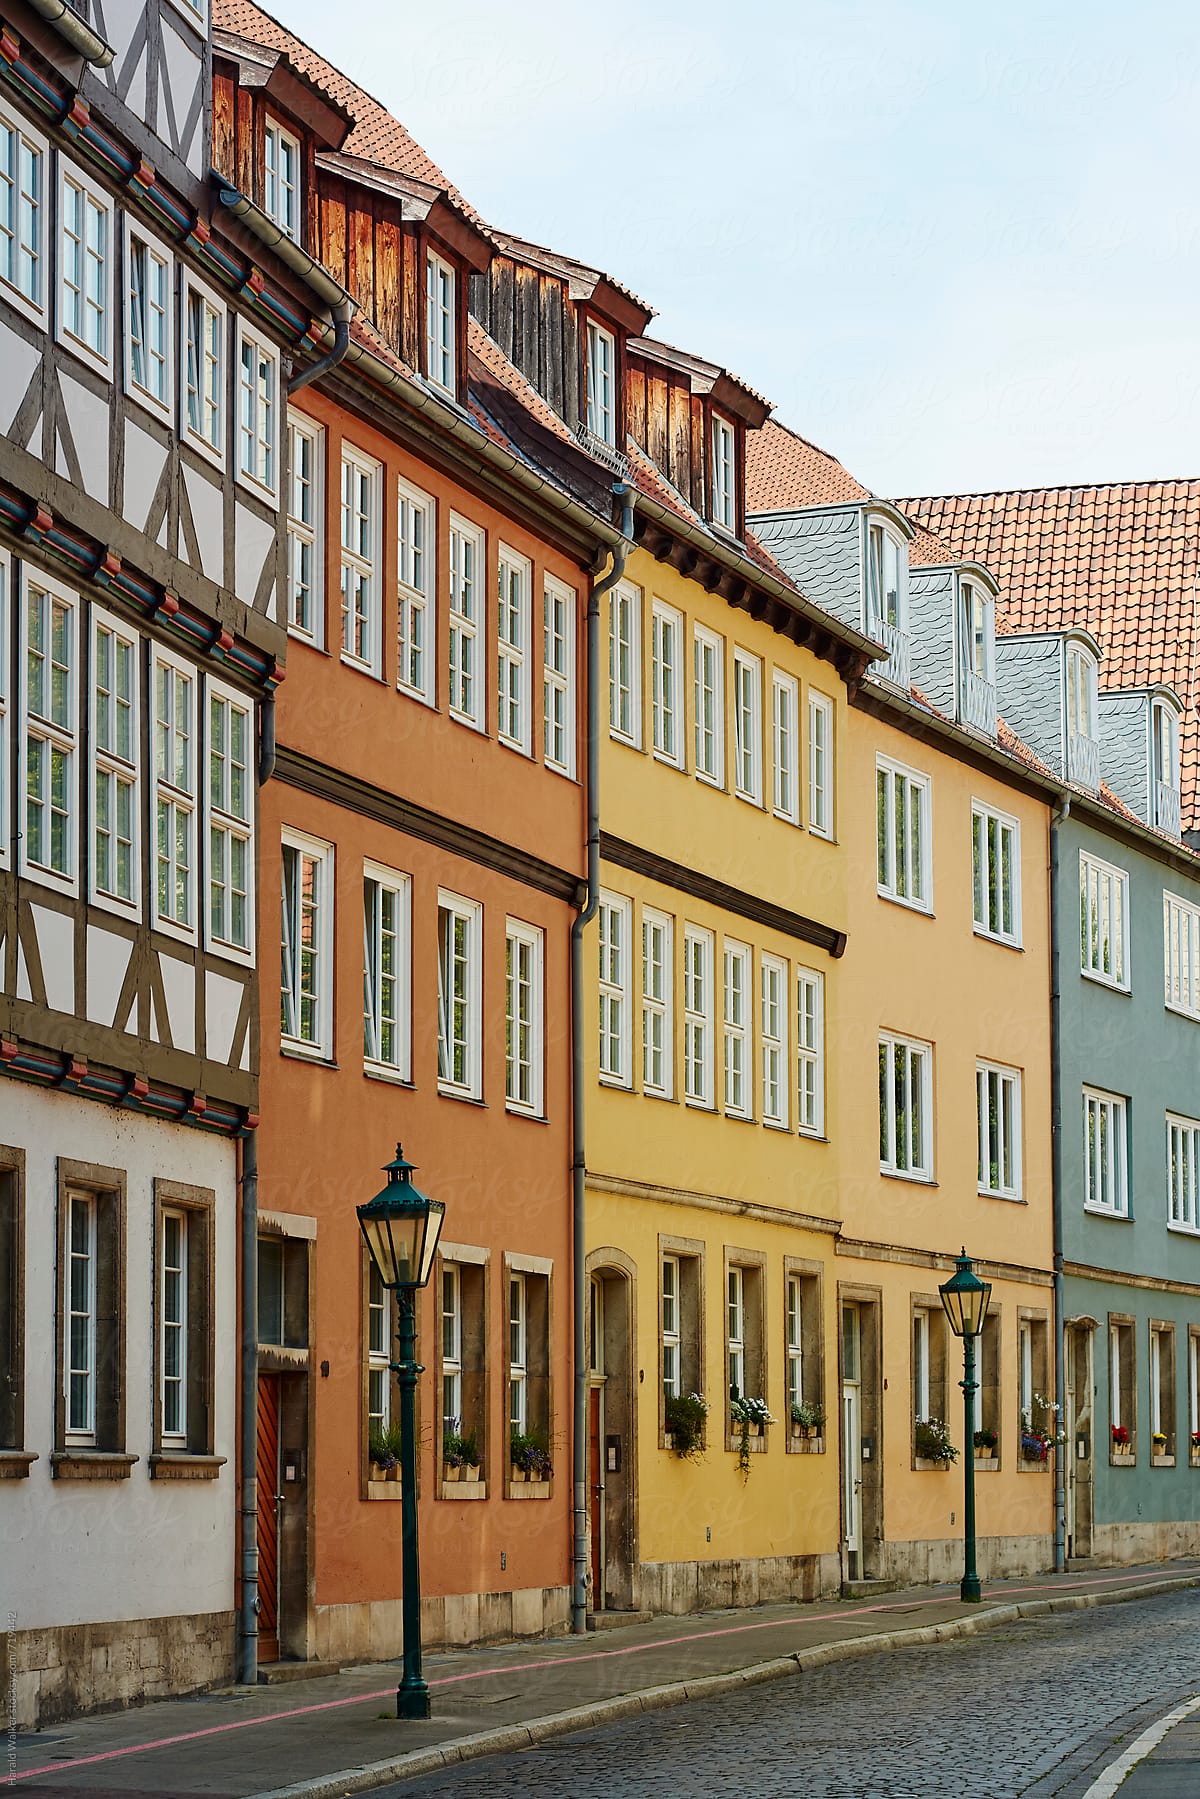 Row of houses in Hannover